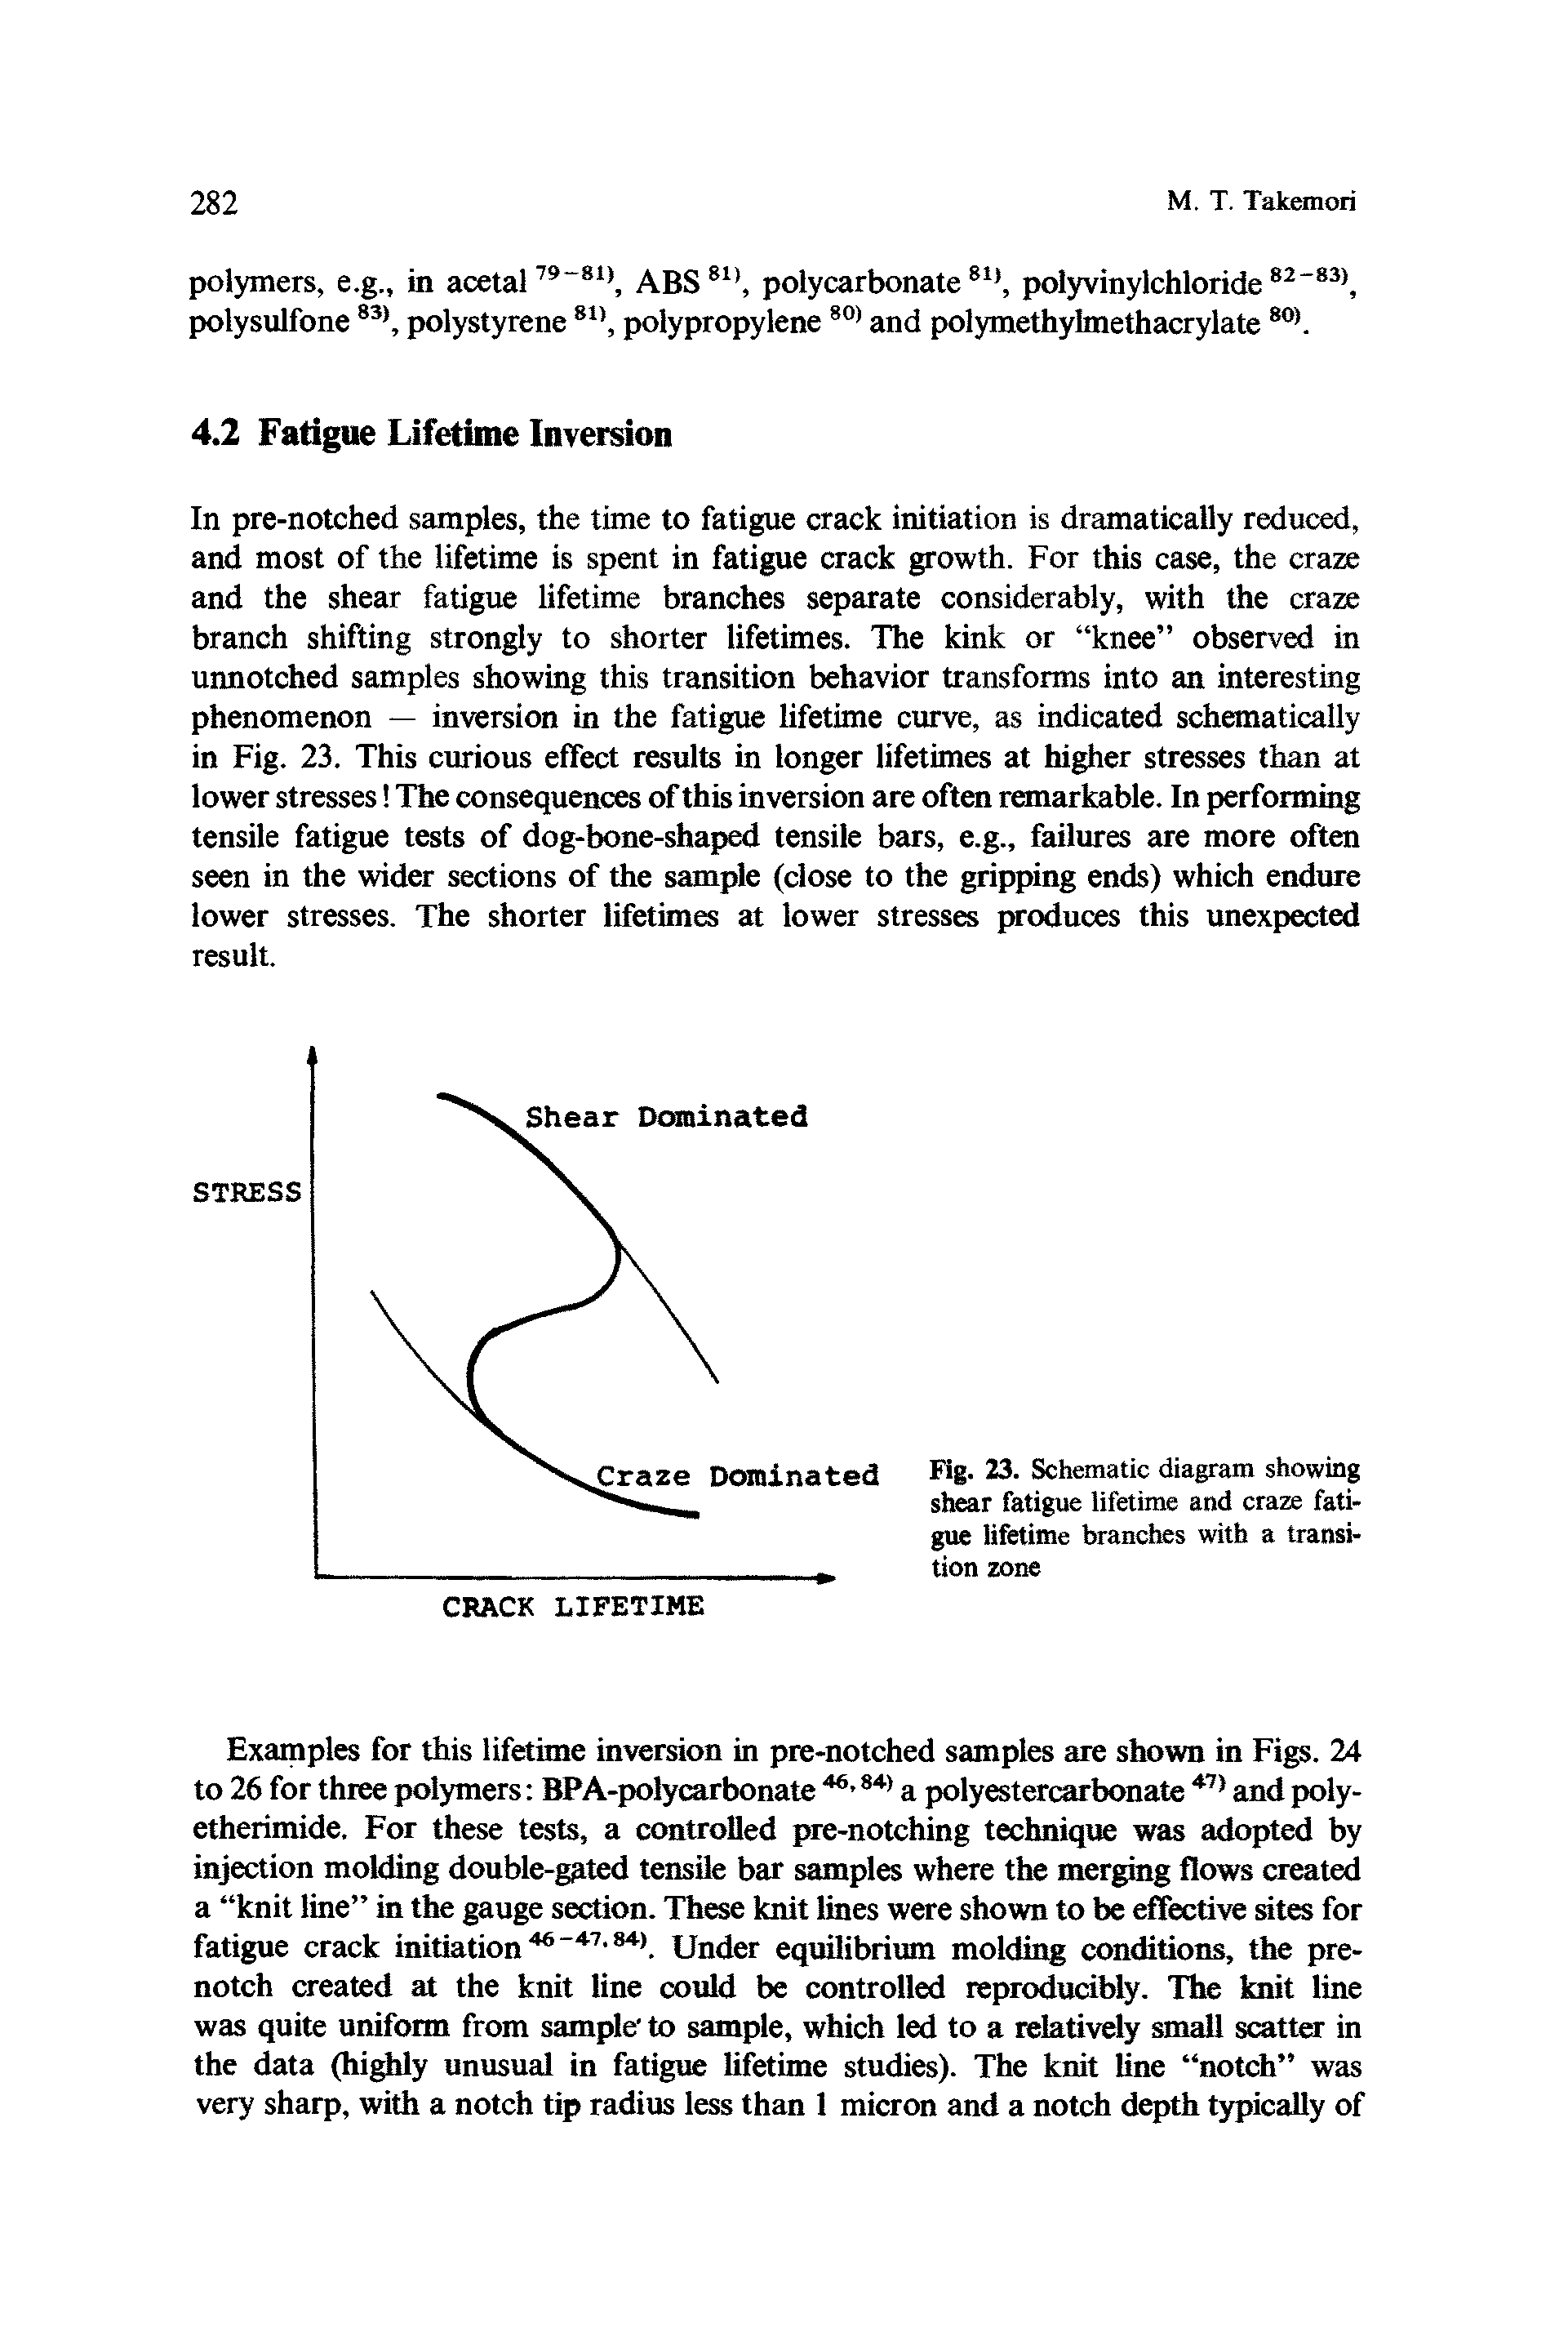 Fig. 23. Schematic diagram showing shear fatigue lifetime and craze fatigue lifetime branches with a transition zone...